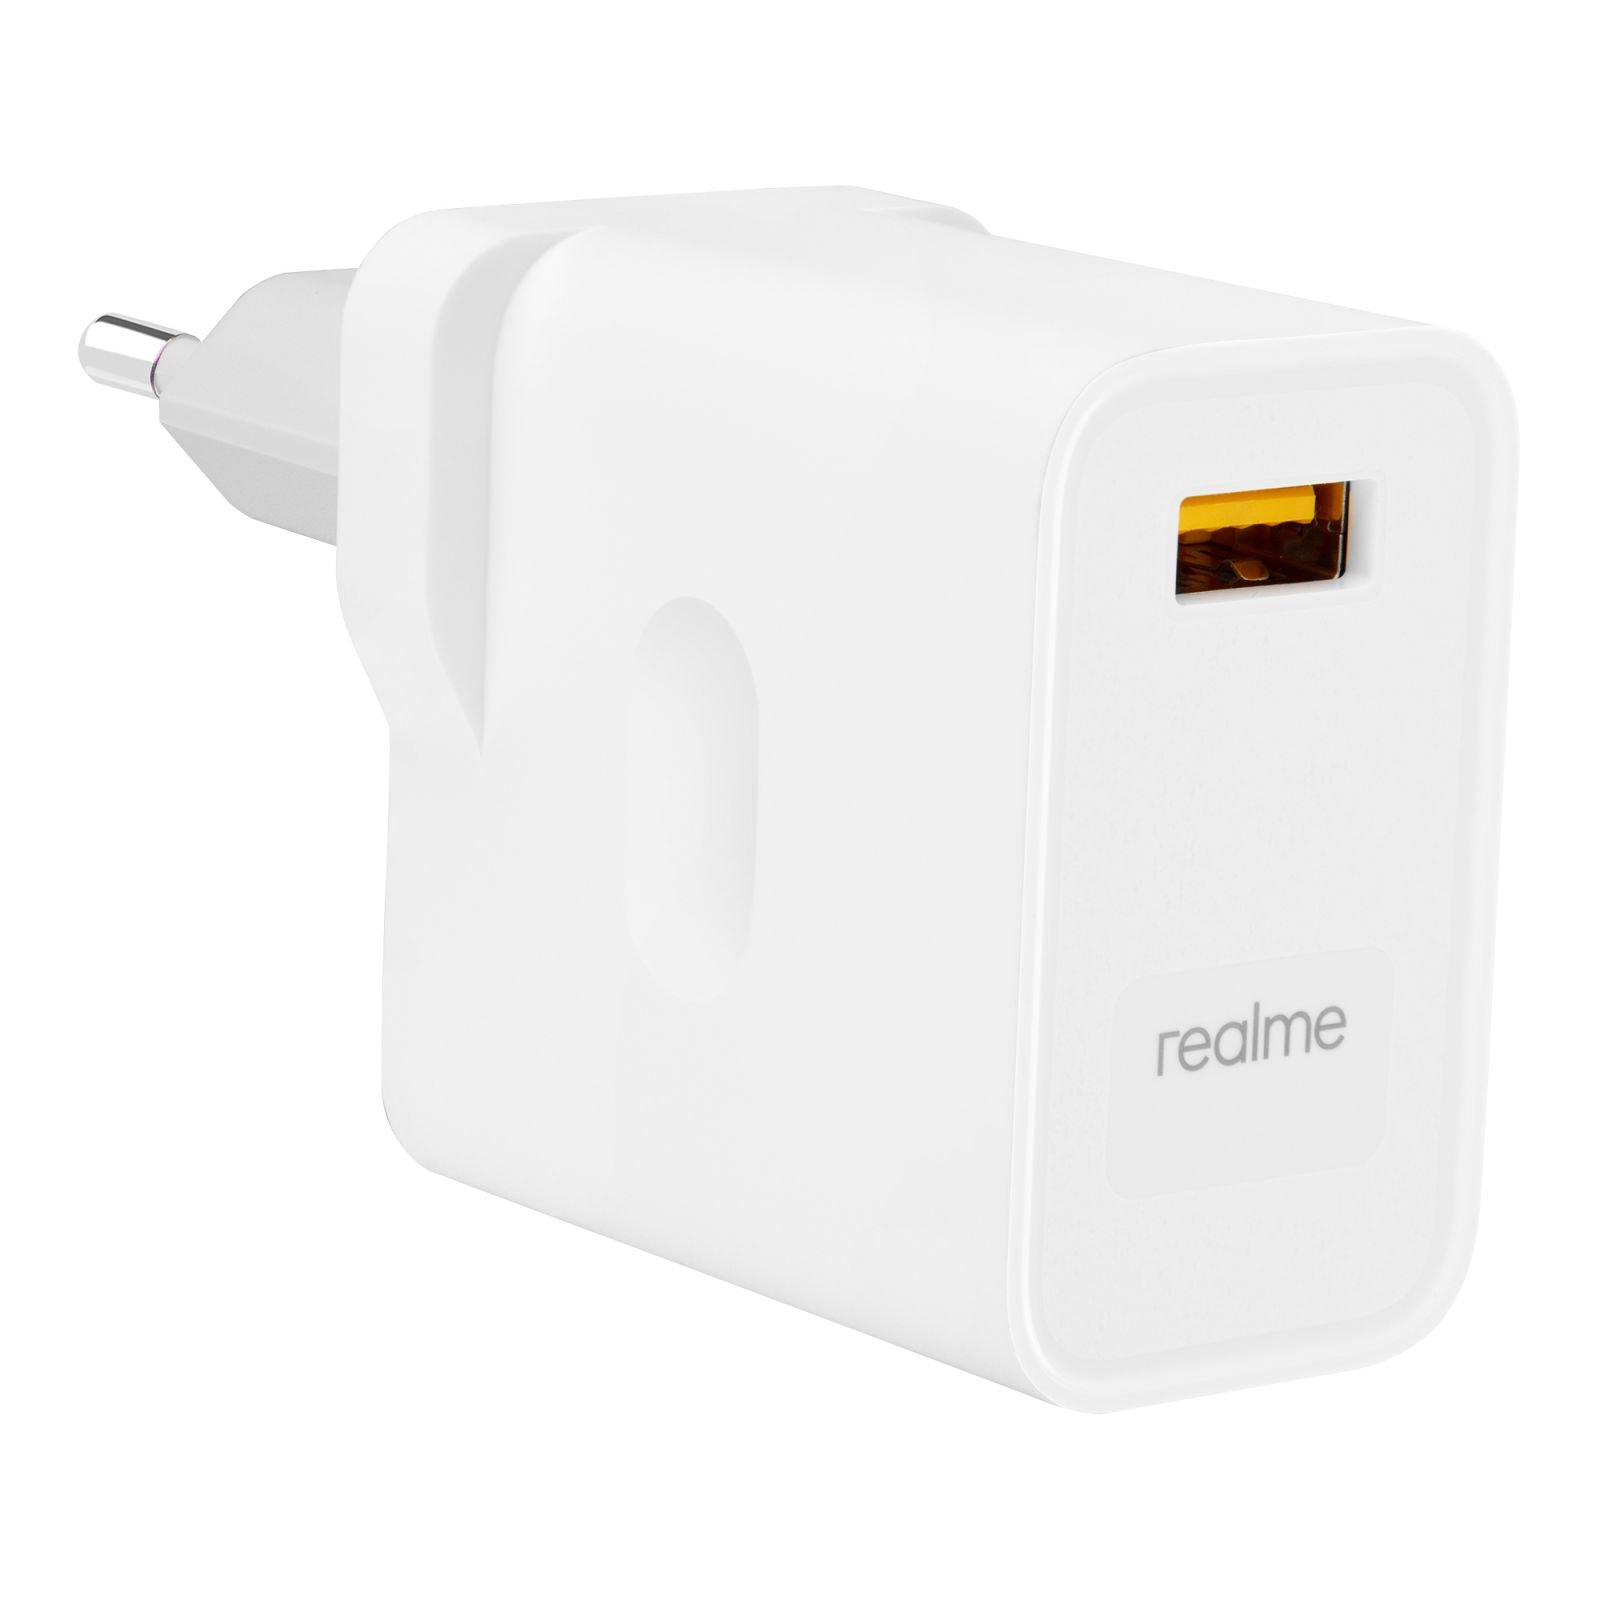 wall-charger-usb-realme-op52caeh-2C-1-x-usb-2C-white